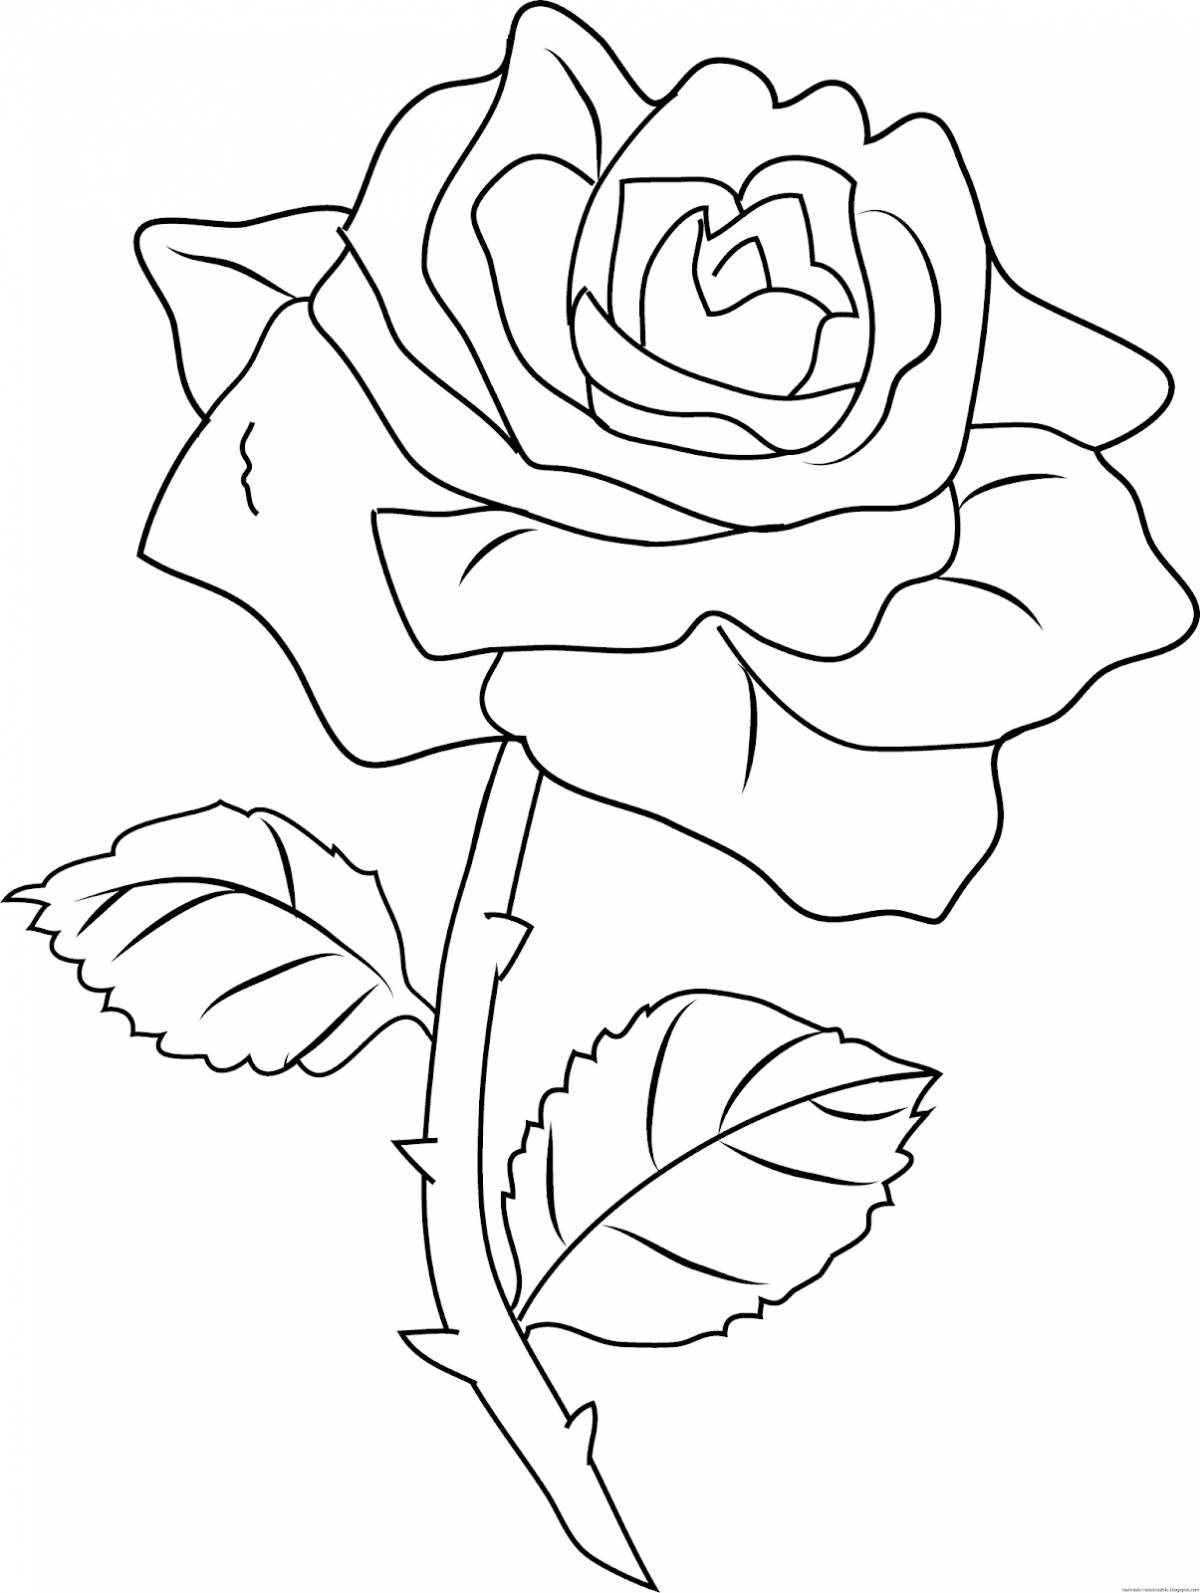 Sweet rose coloring for kids